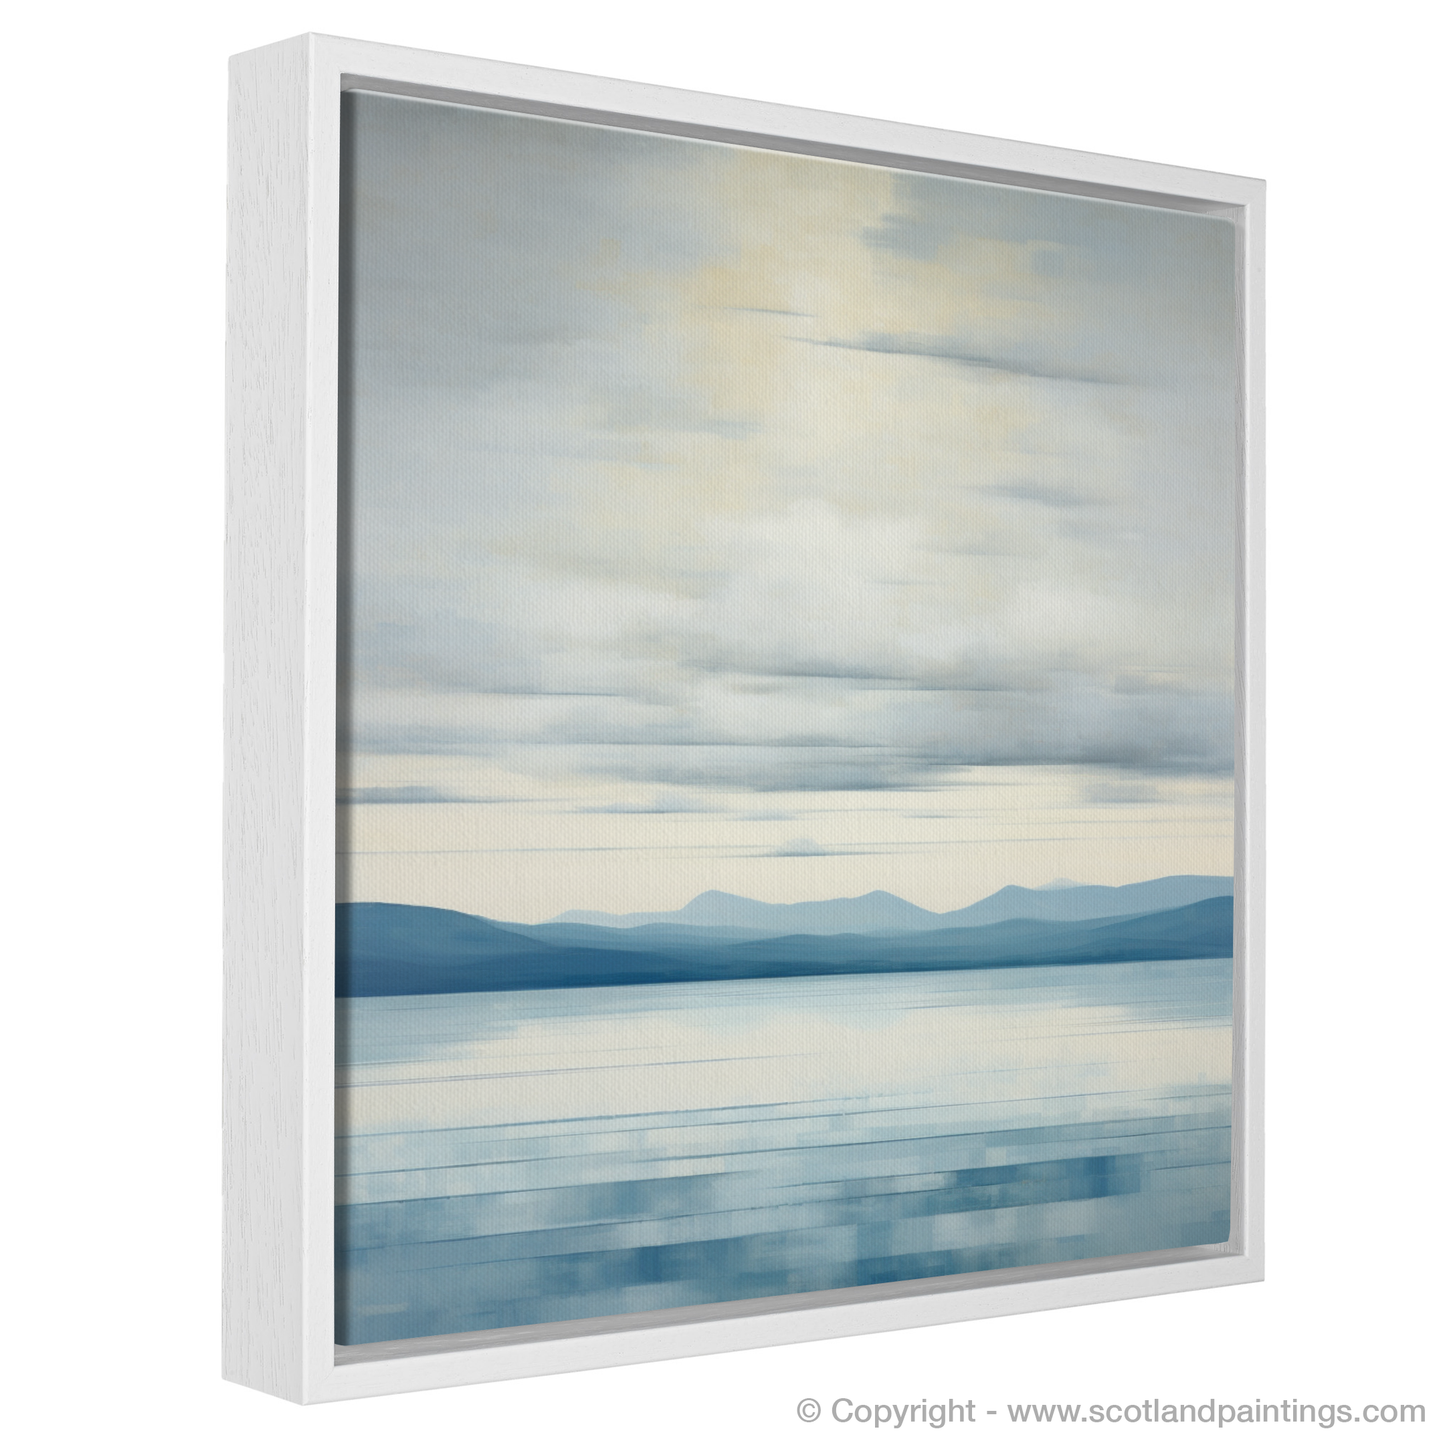 Painting and Art Print of A huge sky above Loch Lomond entitled "Tranquil Horizons of Loch Lomond".